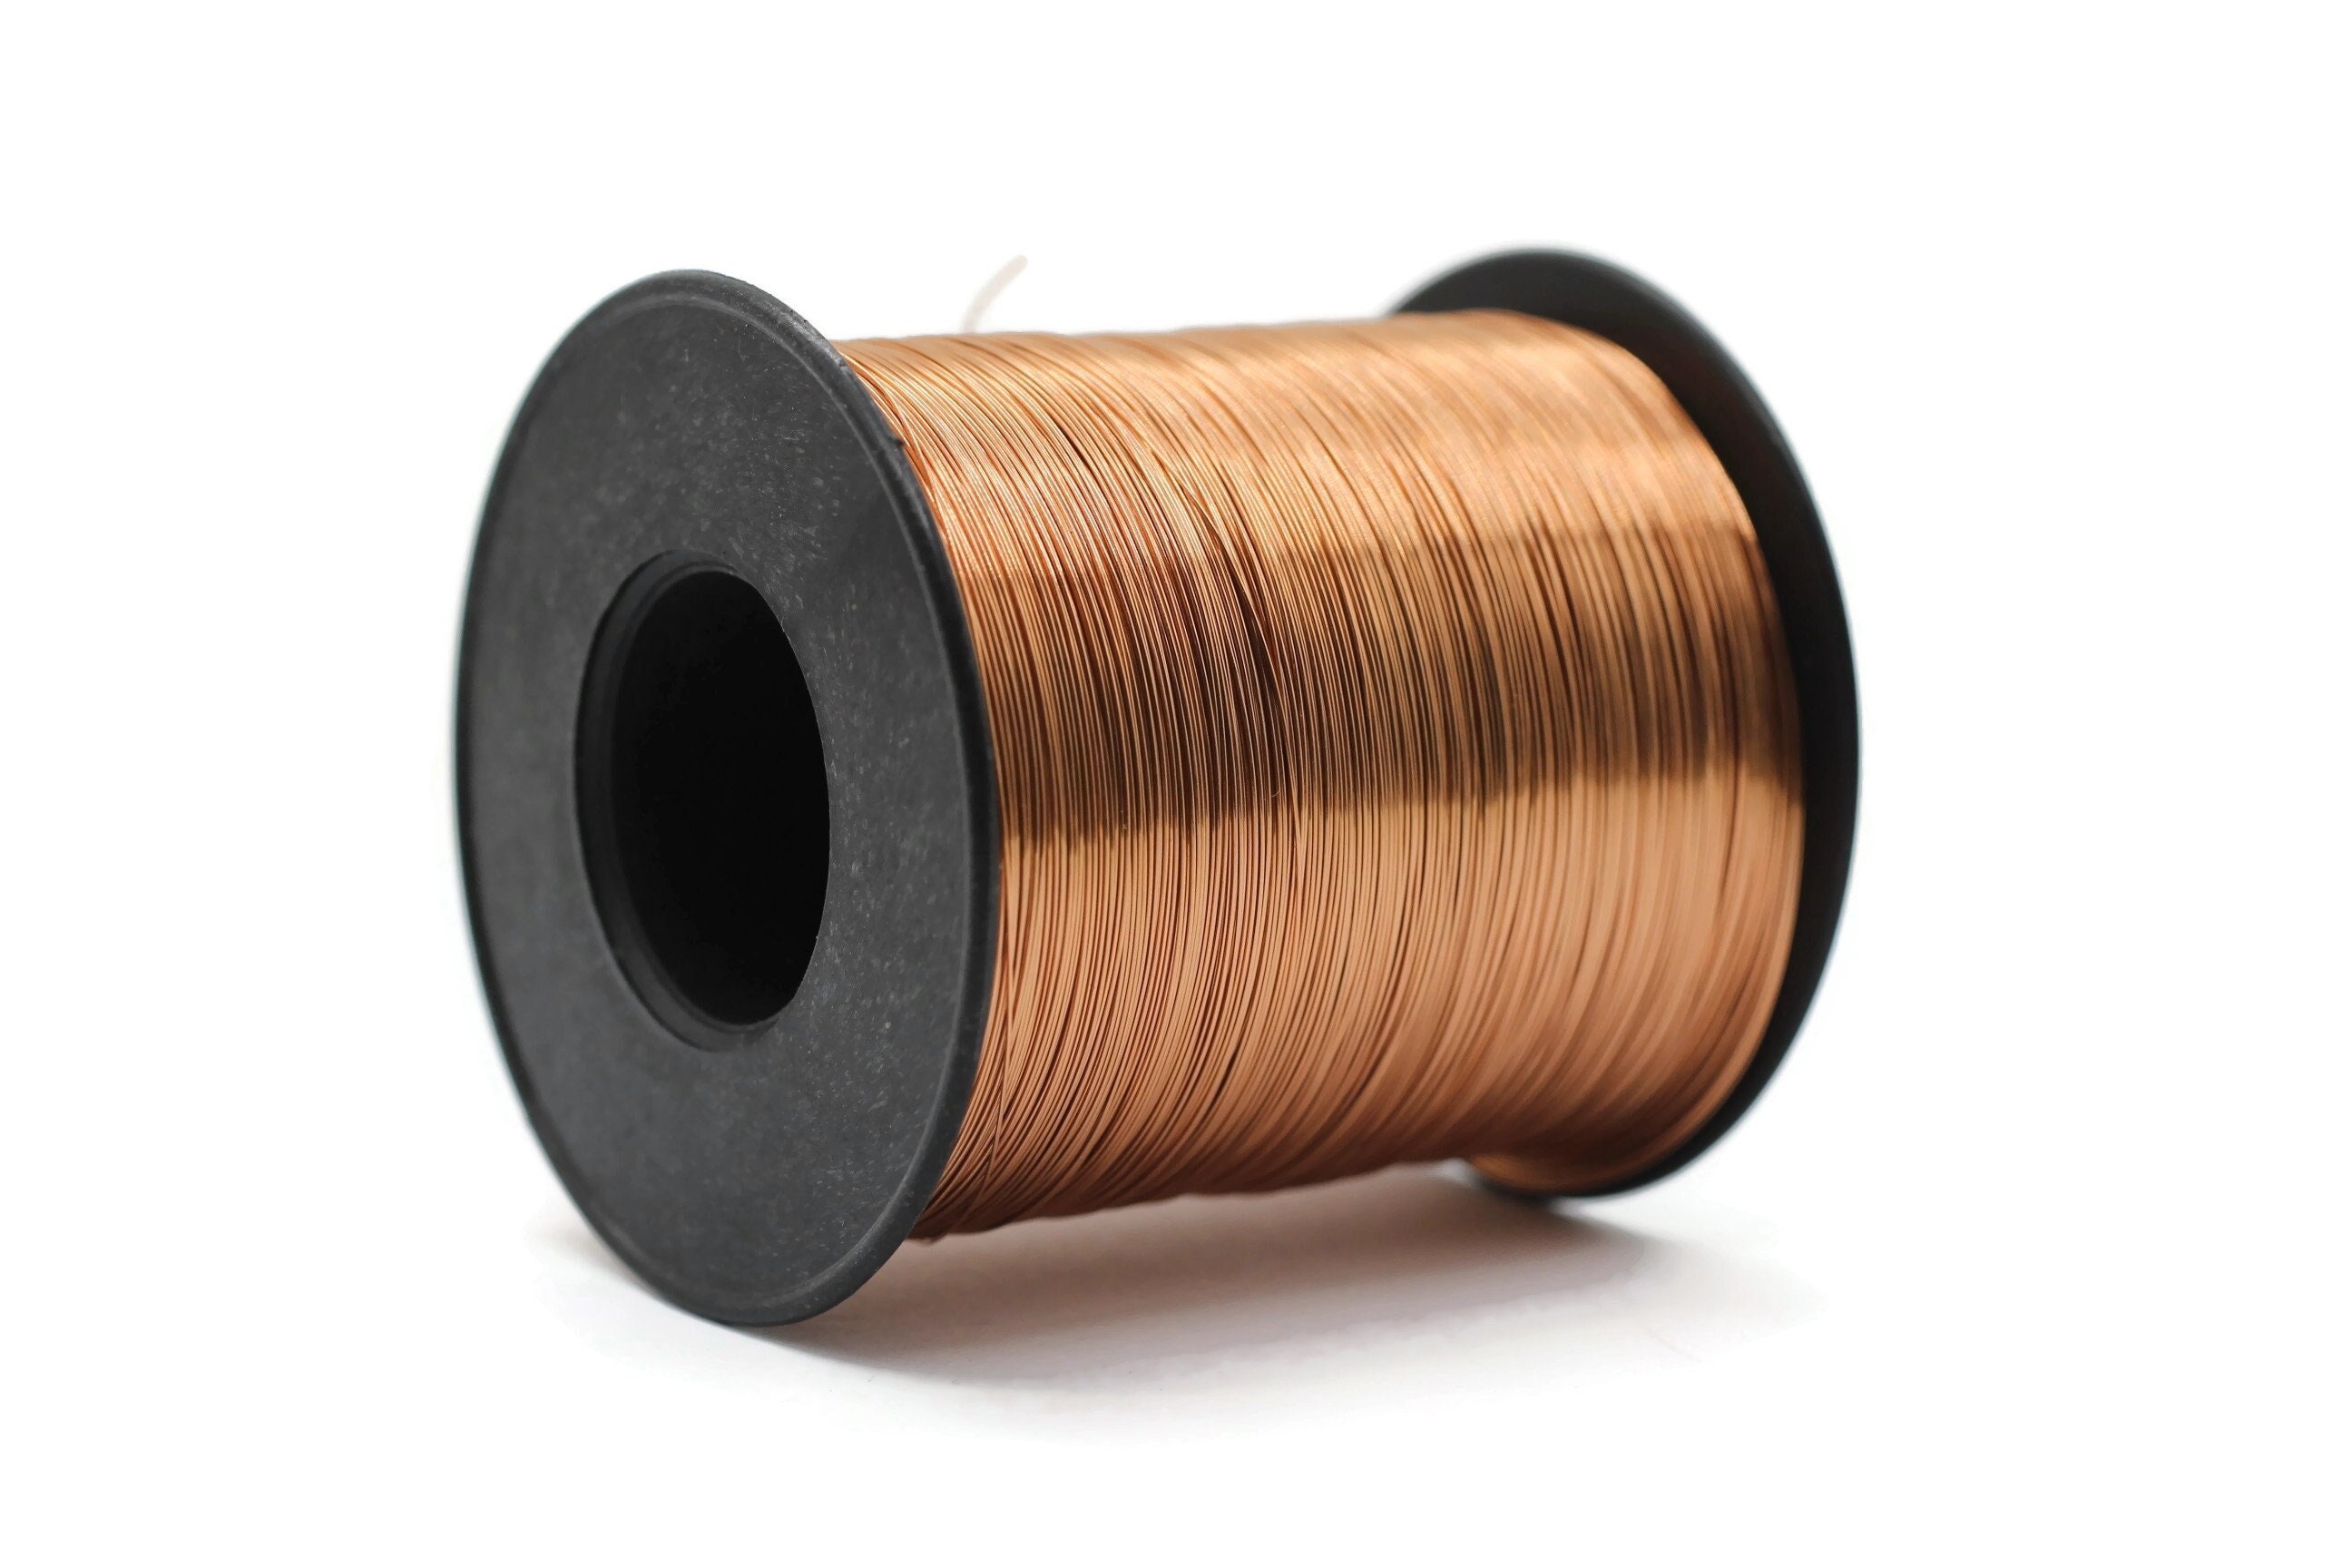 4 oz Solid Copper Wire 16 Gauge 31.5 ft roll